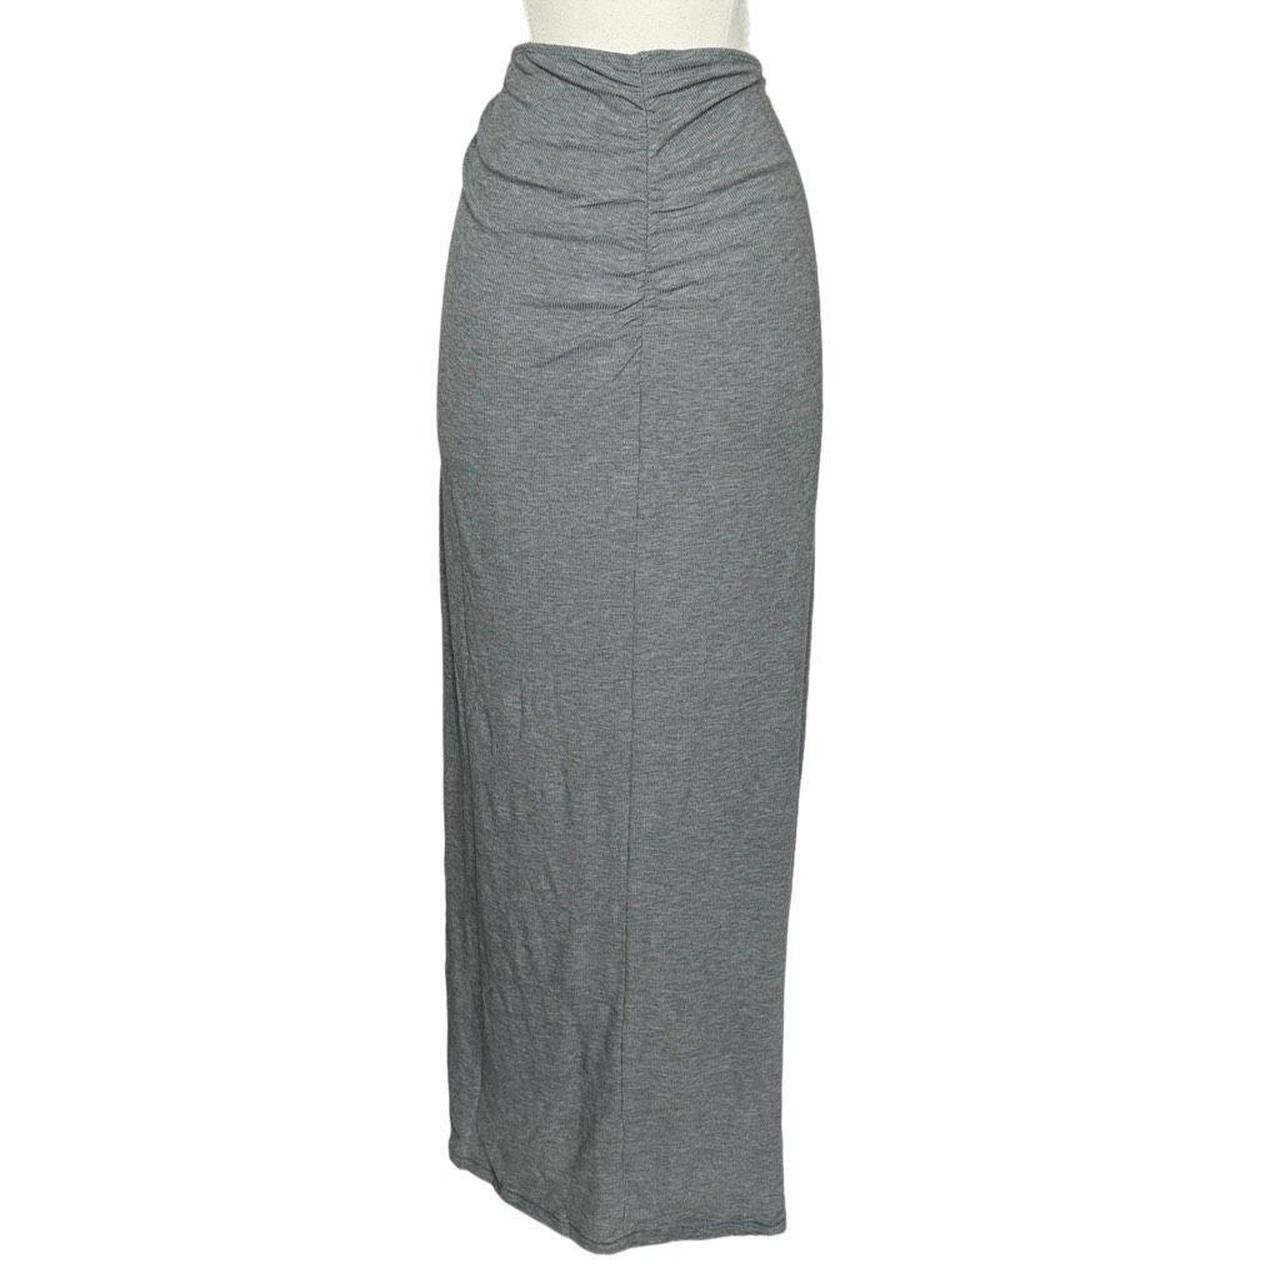 NWT Skims soft lounge RUCHED LONG SKIRT in Heather grey/gray